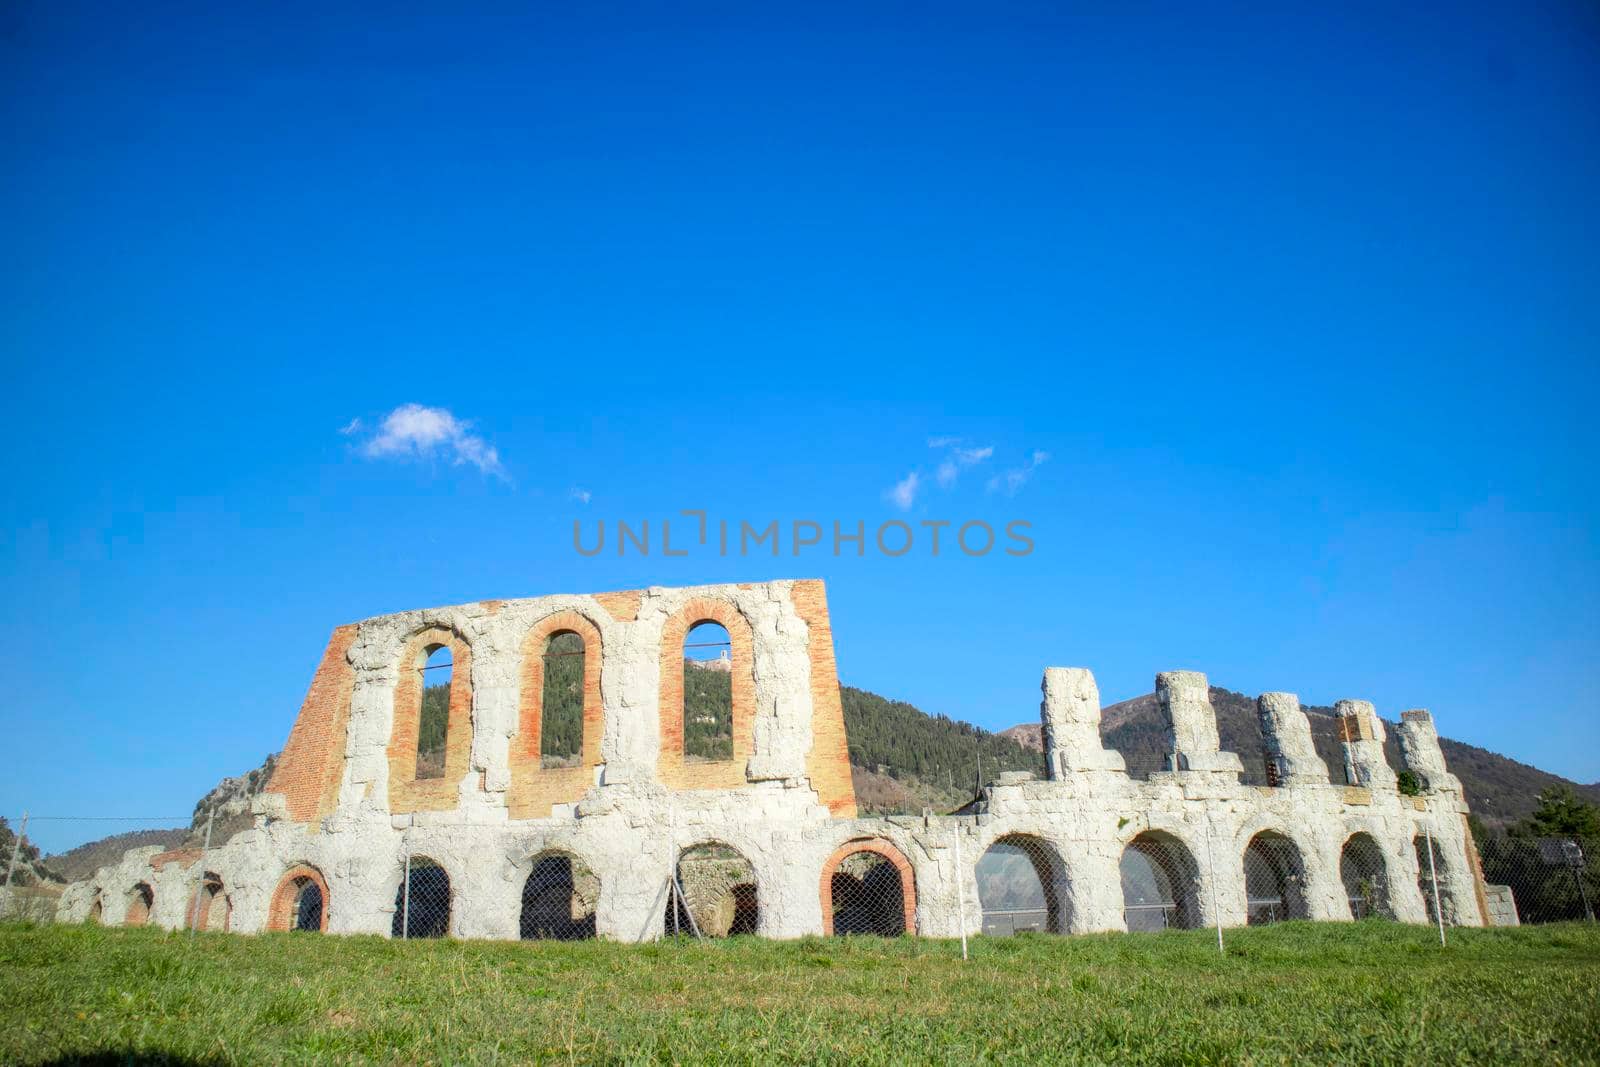 The remains of the Roman amphitheater in Gubbio Italy  by fotografiche.eu